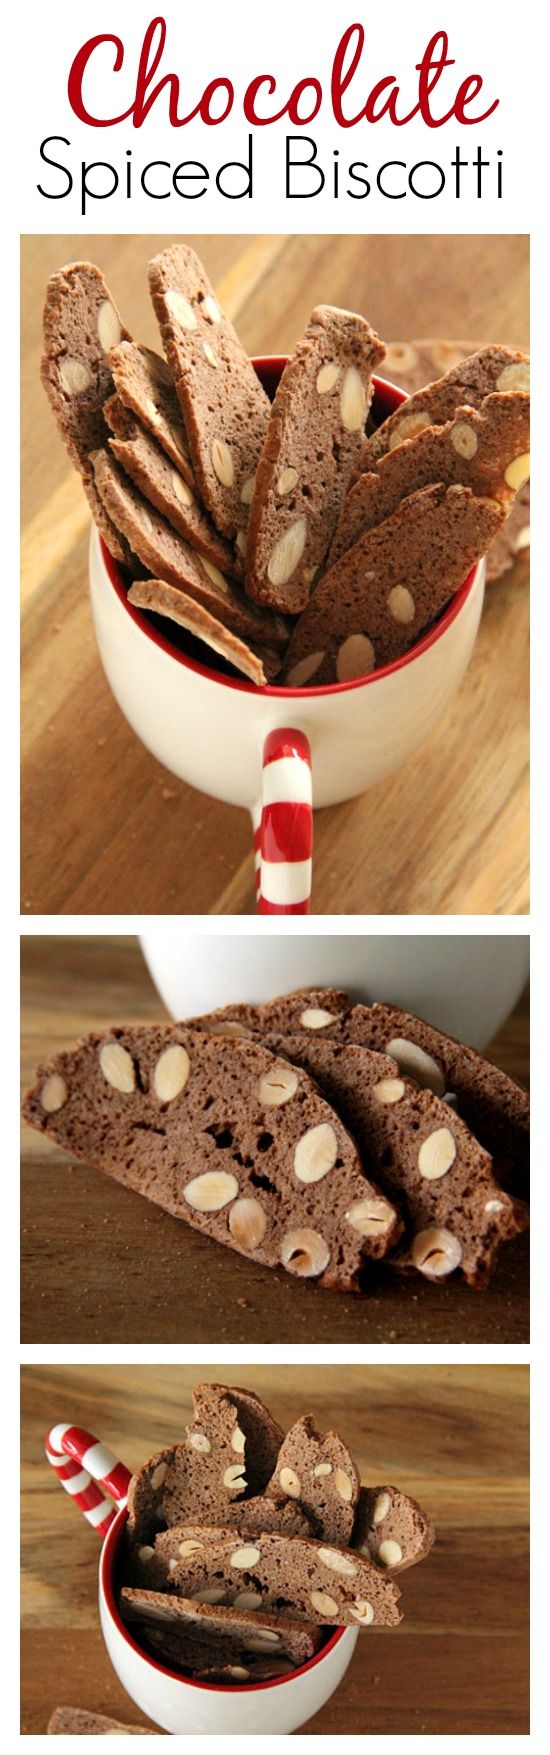 Chocolate Spiced Biscotti - super easy, crunchy, and the BEST biscotti loaded with chocolate and almonds, get the recipe | rasamalaysia.com